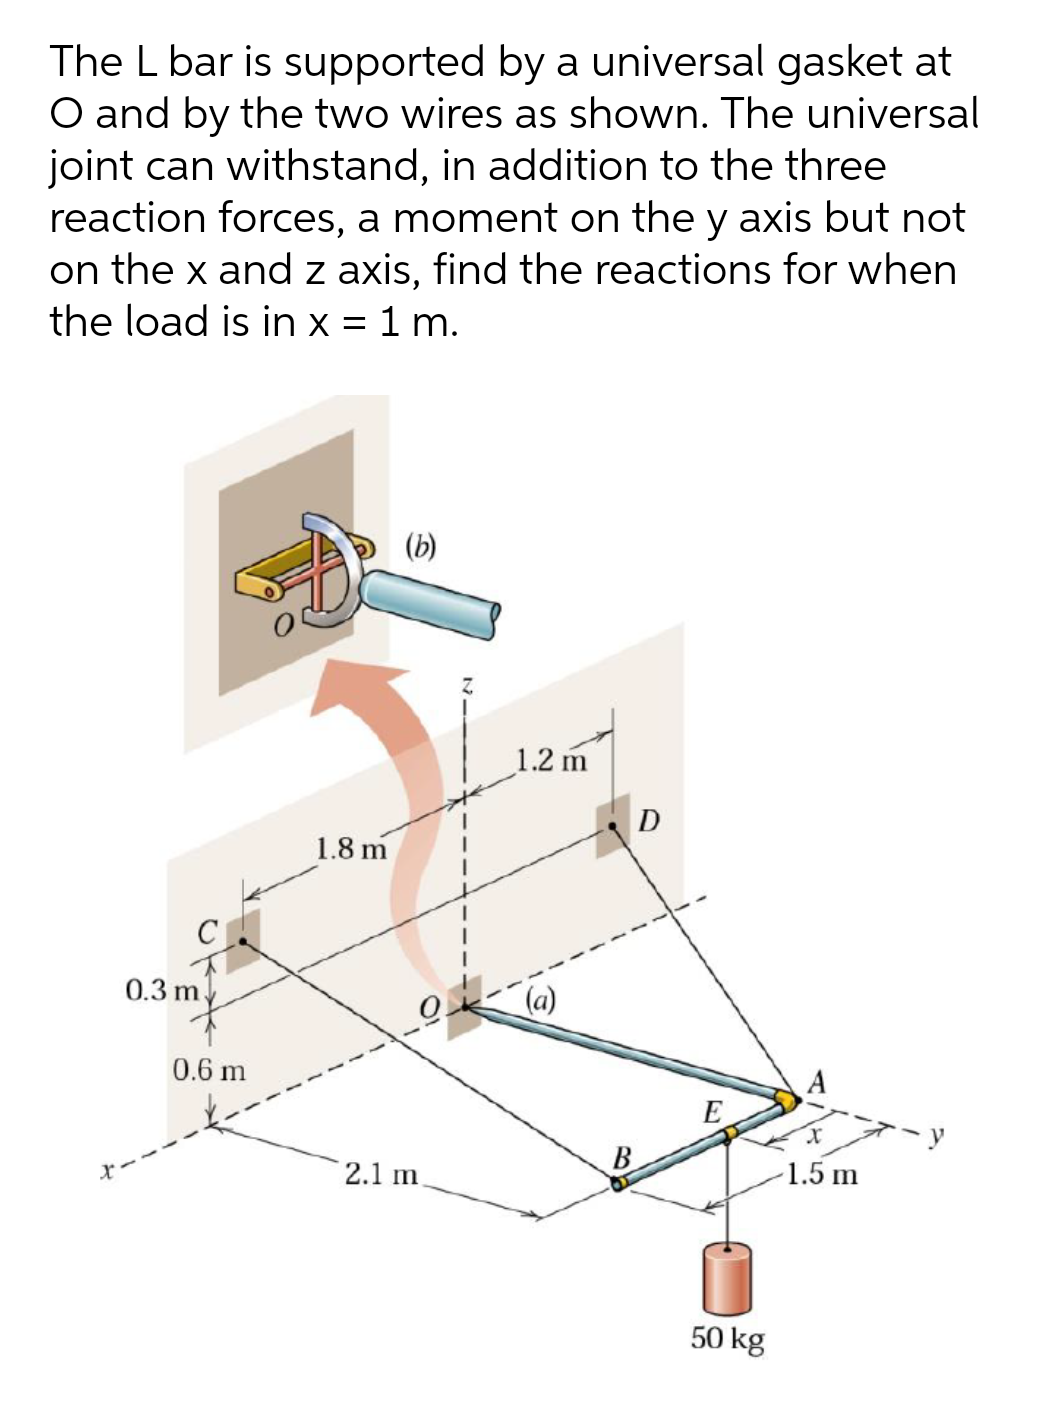 The L bar is supported by a universal gasket at
O and by the two wires as shown. The universal
joint can withstand, in addition to the three
reaction forces, a moment on the y axis but not
on the x and z axis, find the reactions for when
the load is in x = 1 m.
(b)
1.2 m
1.8 m
0.3 m.
0.6 m
E
B
2.1 m
-1.5 m
50 kg
